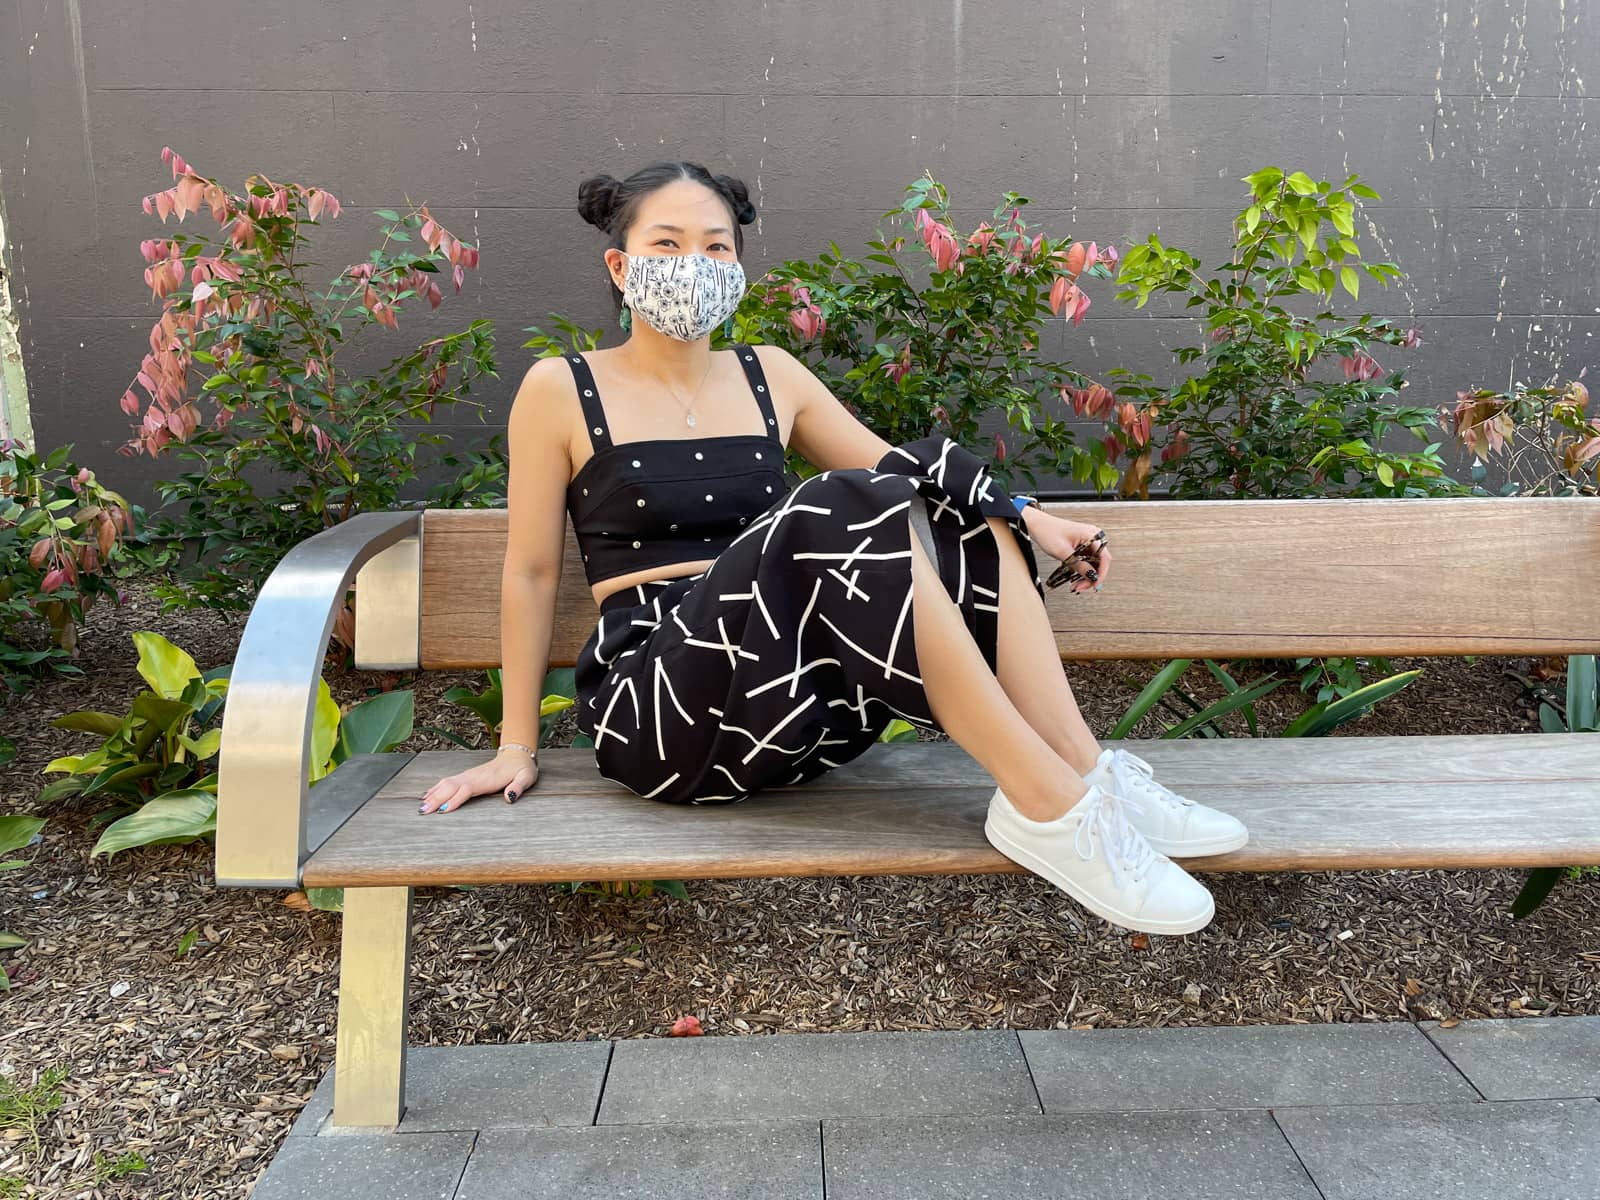 image 1: An Asian woman with dark hair, wearing a sleeveless black crop top. with round metal studs, black wide-leg cropped pants with a geometric line print, and white sneakers. Her hair is in two buns on either side of her head. She is wearing a light face mask with Japanese style navy floral print. The woman is holding her sunglasses in her hand and her other hand is on a wooden bench. Her knees are bent and her feet are on the bench and to her side.